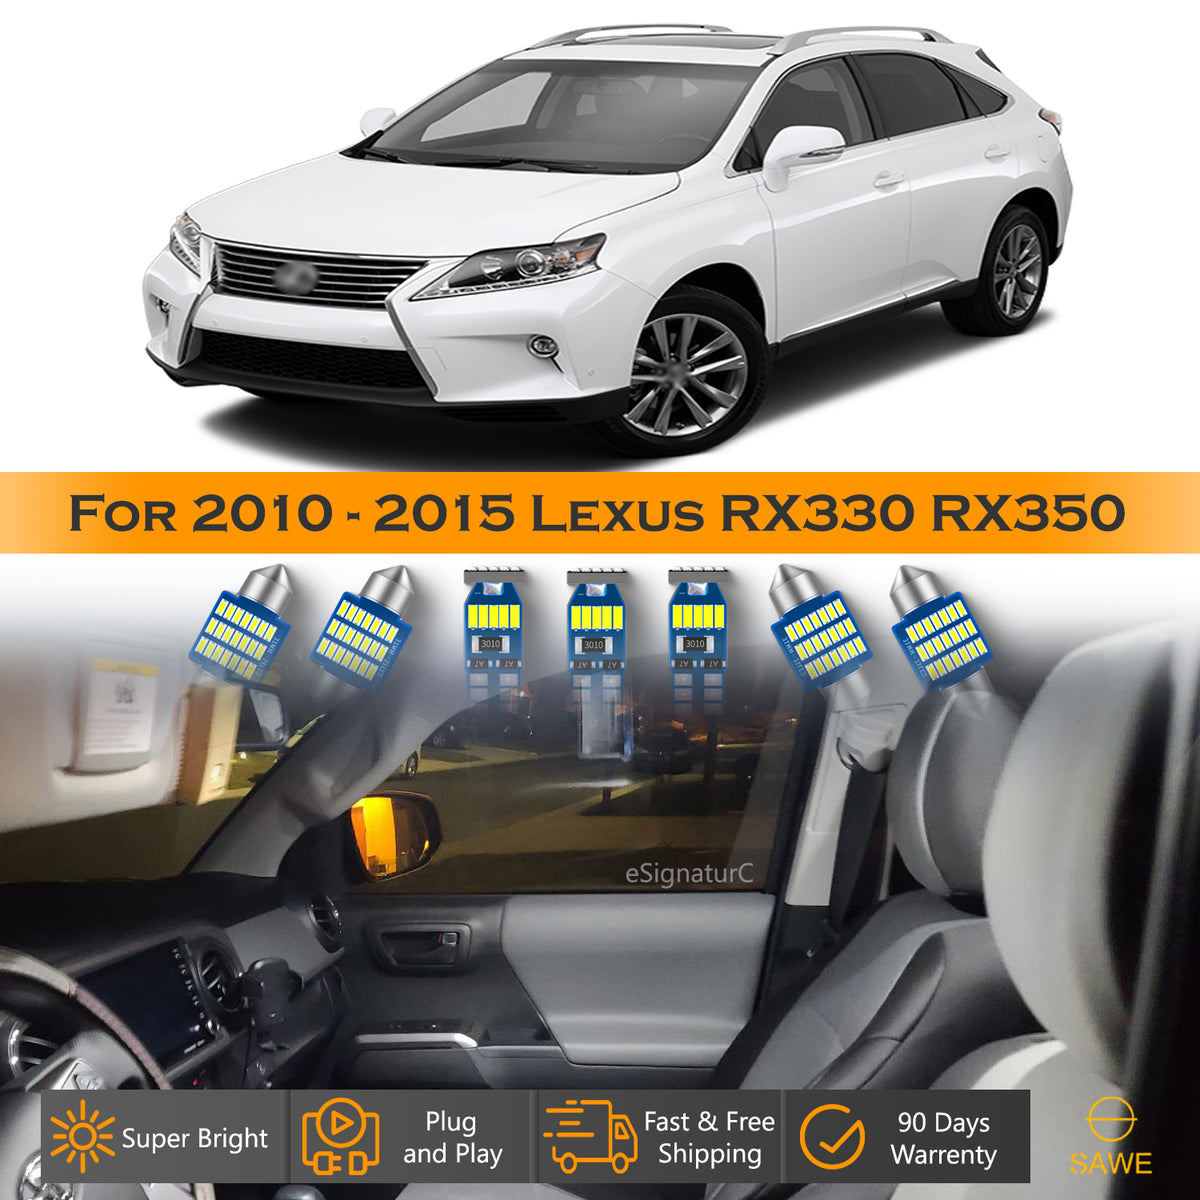 For Lexus RX350 RX450h Interior LED Lights - Dome & Map Light Bulbs Package Kit for 2010 - 2015 - White